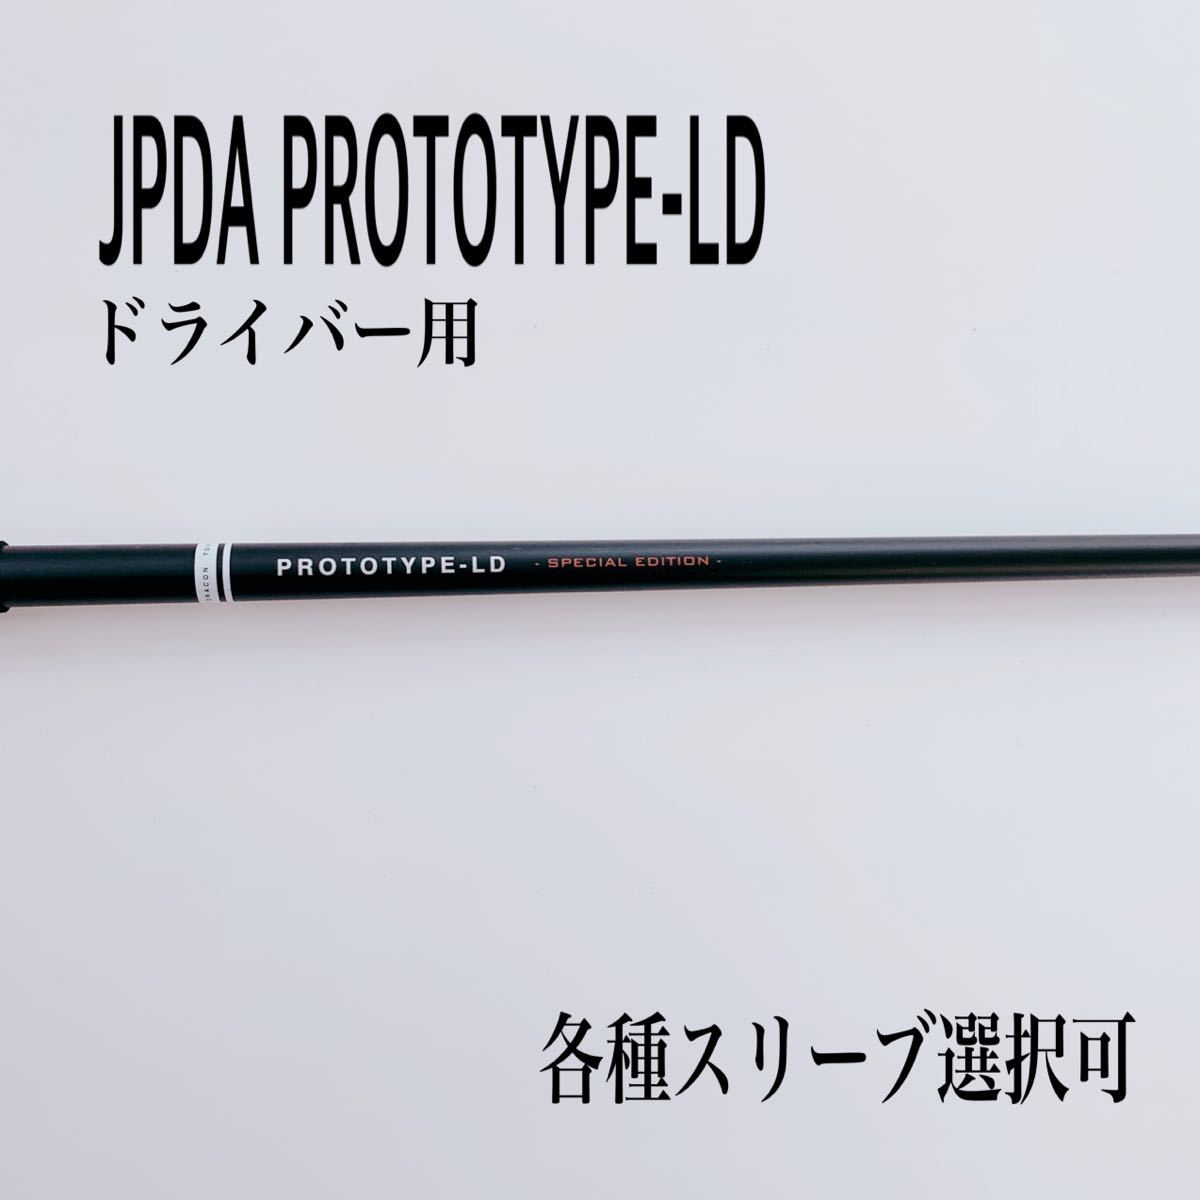 PROTOTYPE-LD SPEED EDITION 3841 ピンスリーブ 2023.encuentroaacc.ar